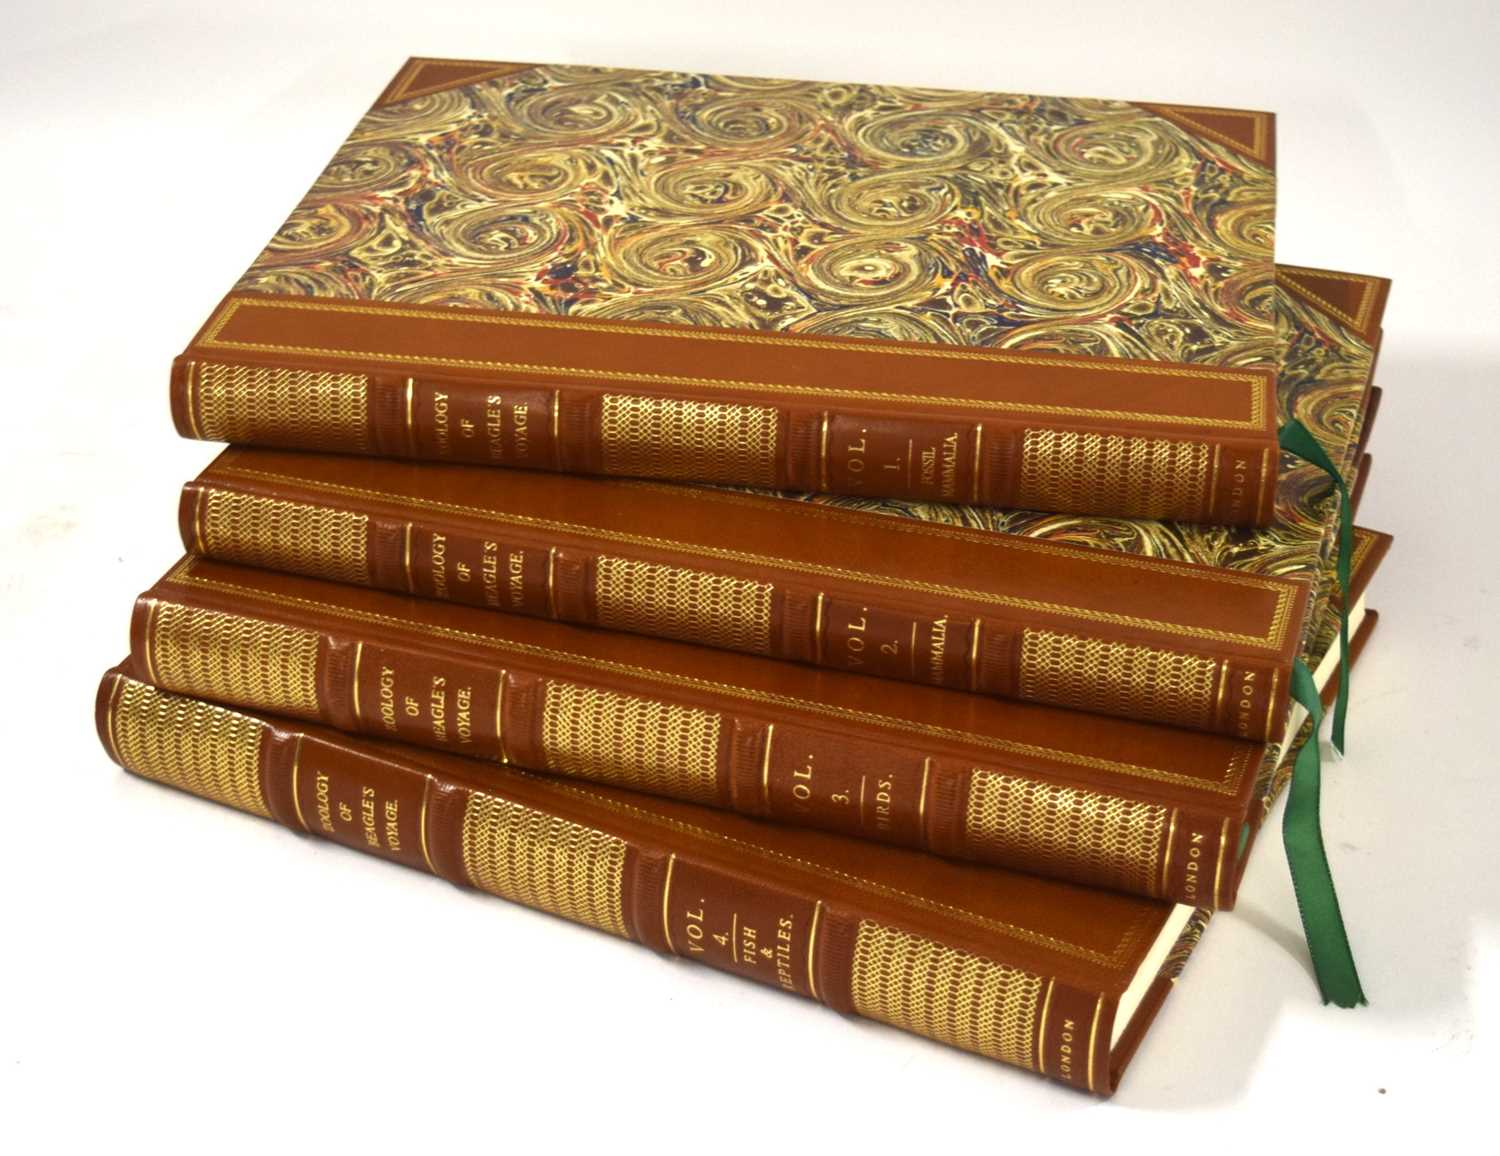 Natural History Book interest - Modern leather bound facsimiles of "Zoology of the Beagles Voyage" - Image 3 of 5